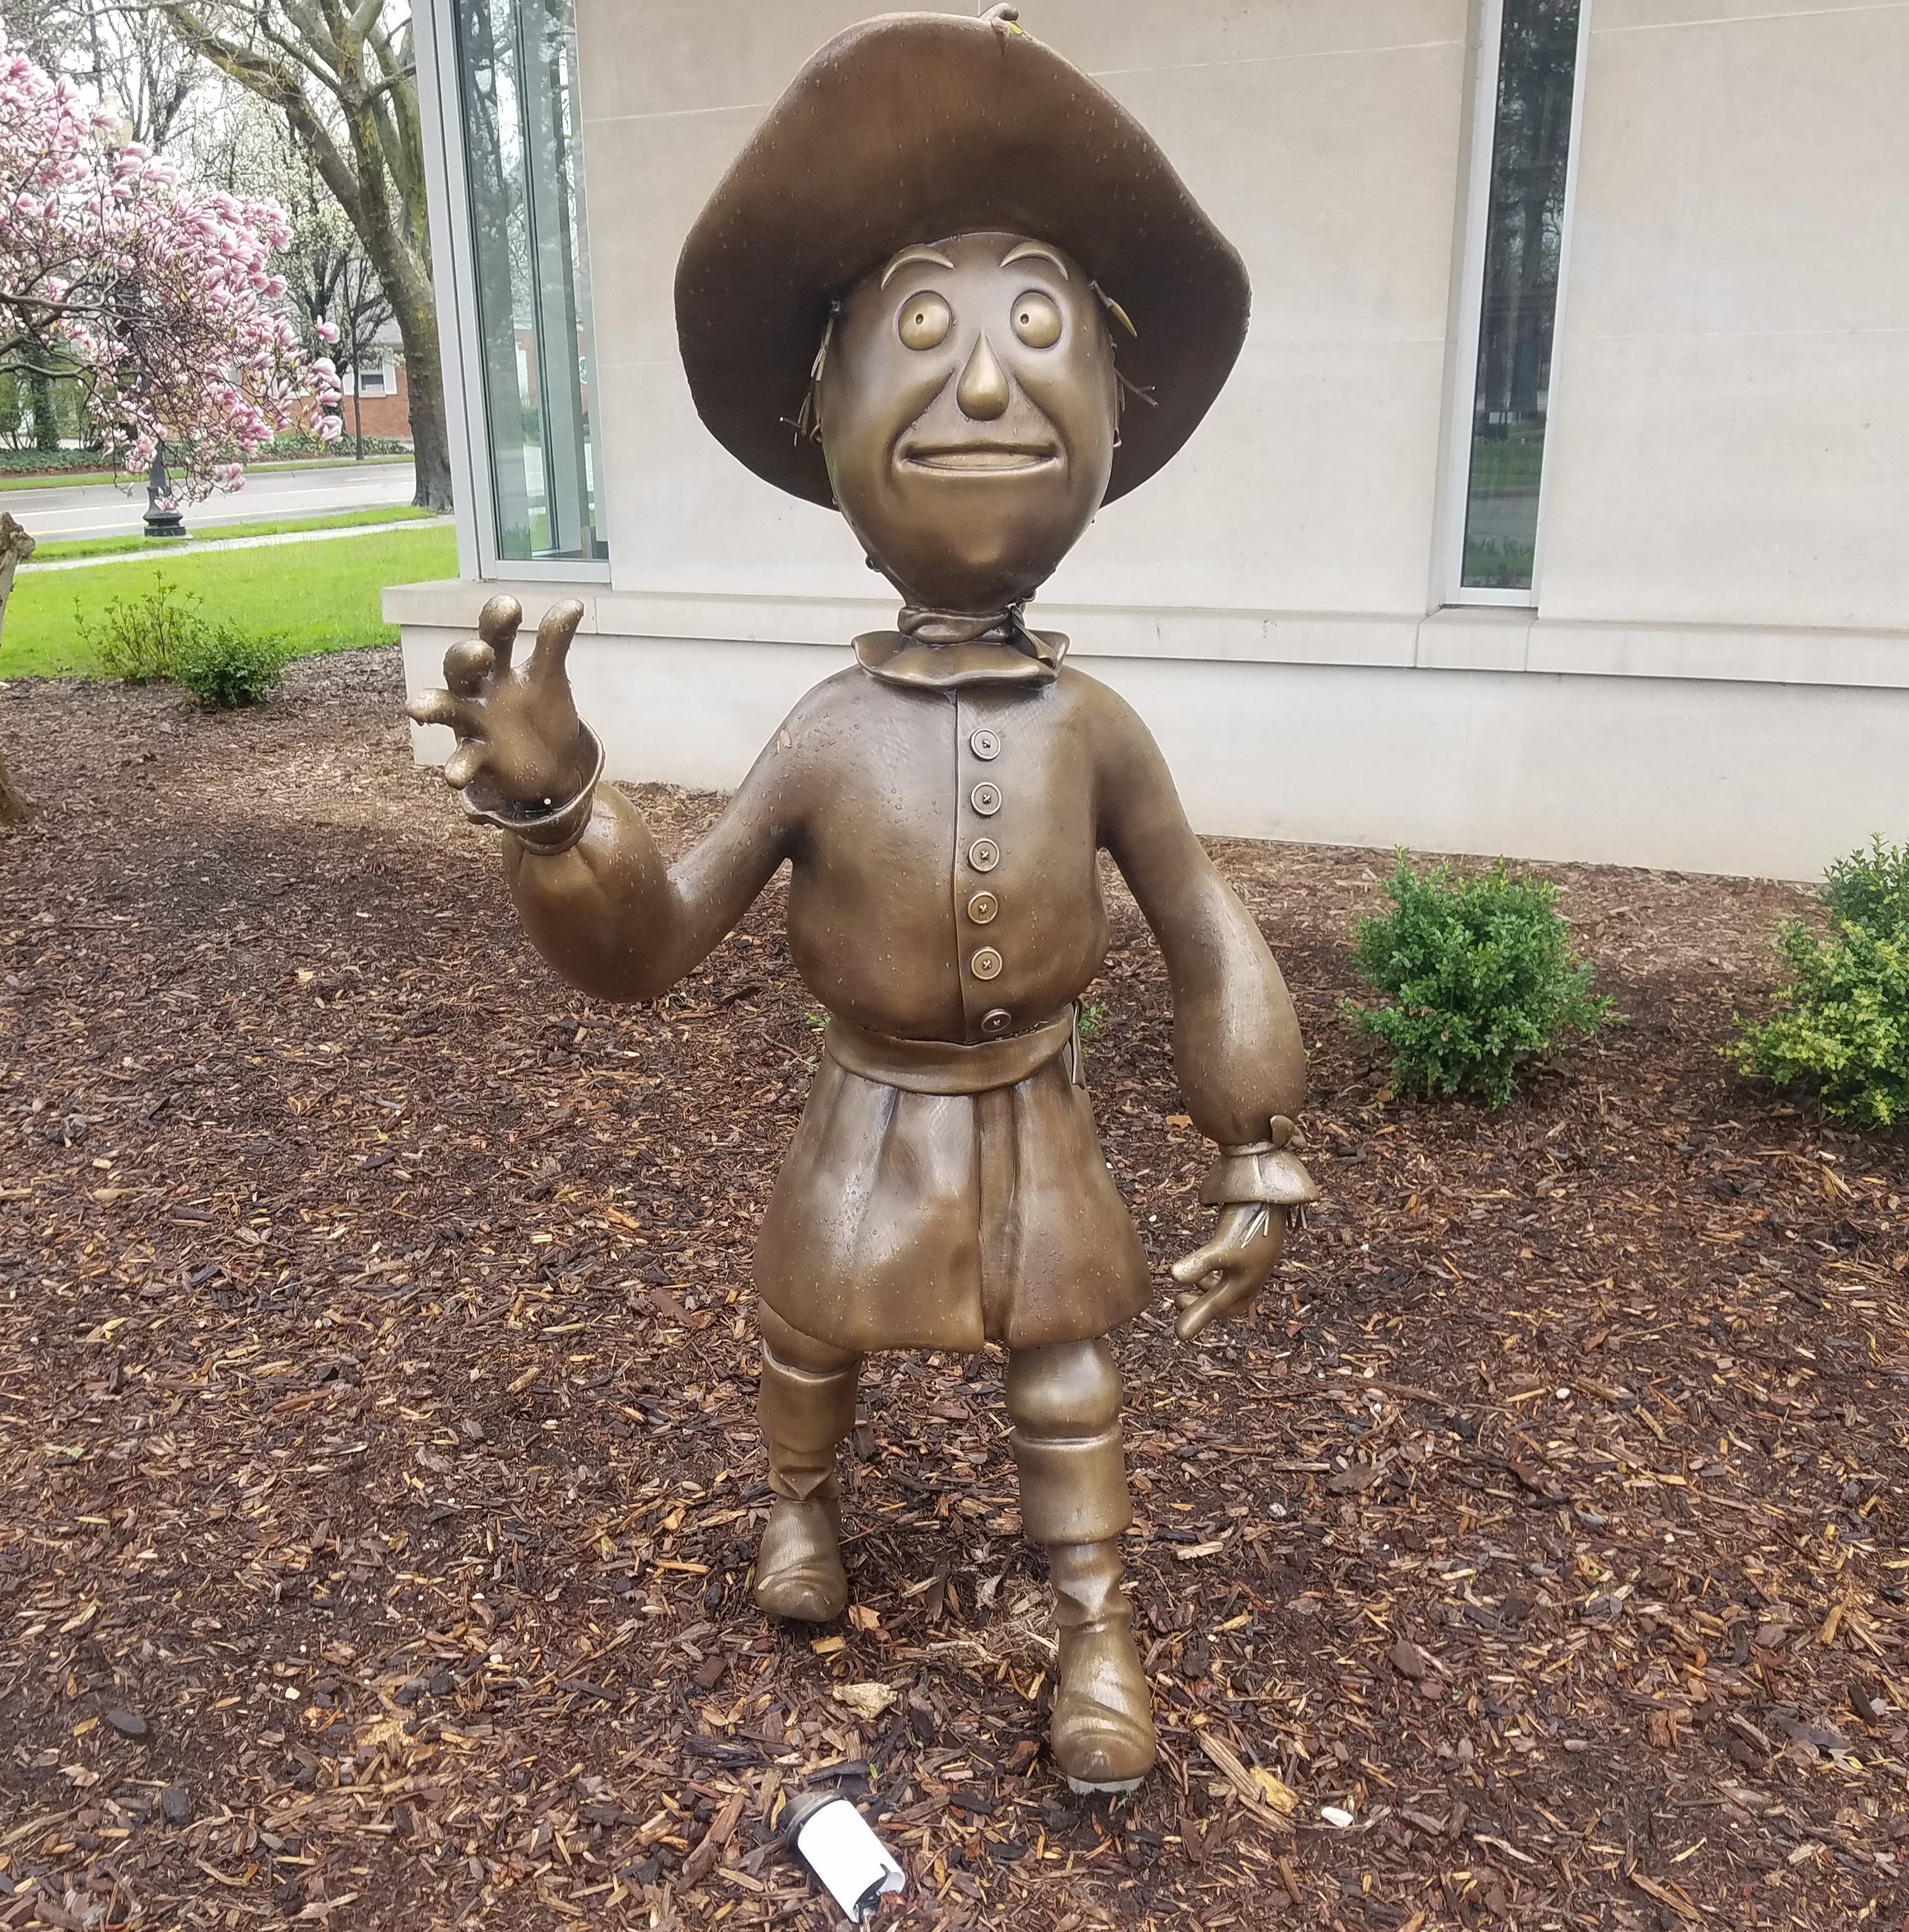 Holland's Wizard of Oz statues, herrick District Library, April